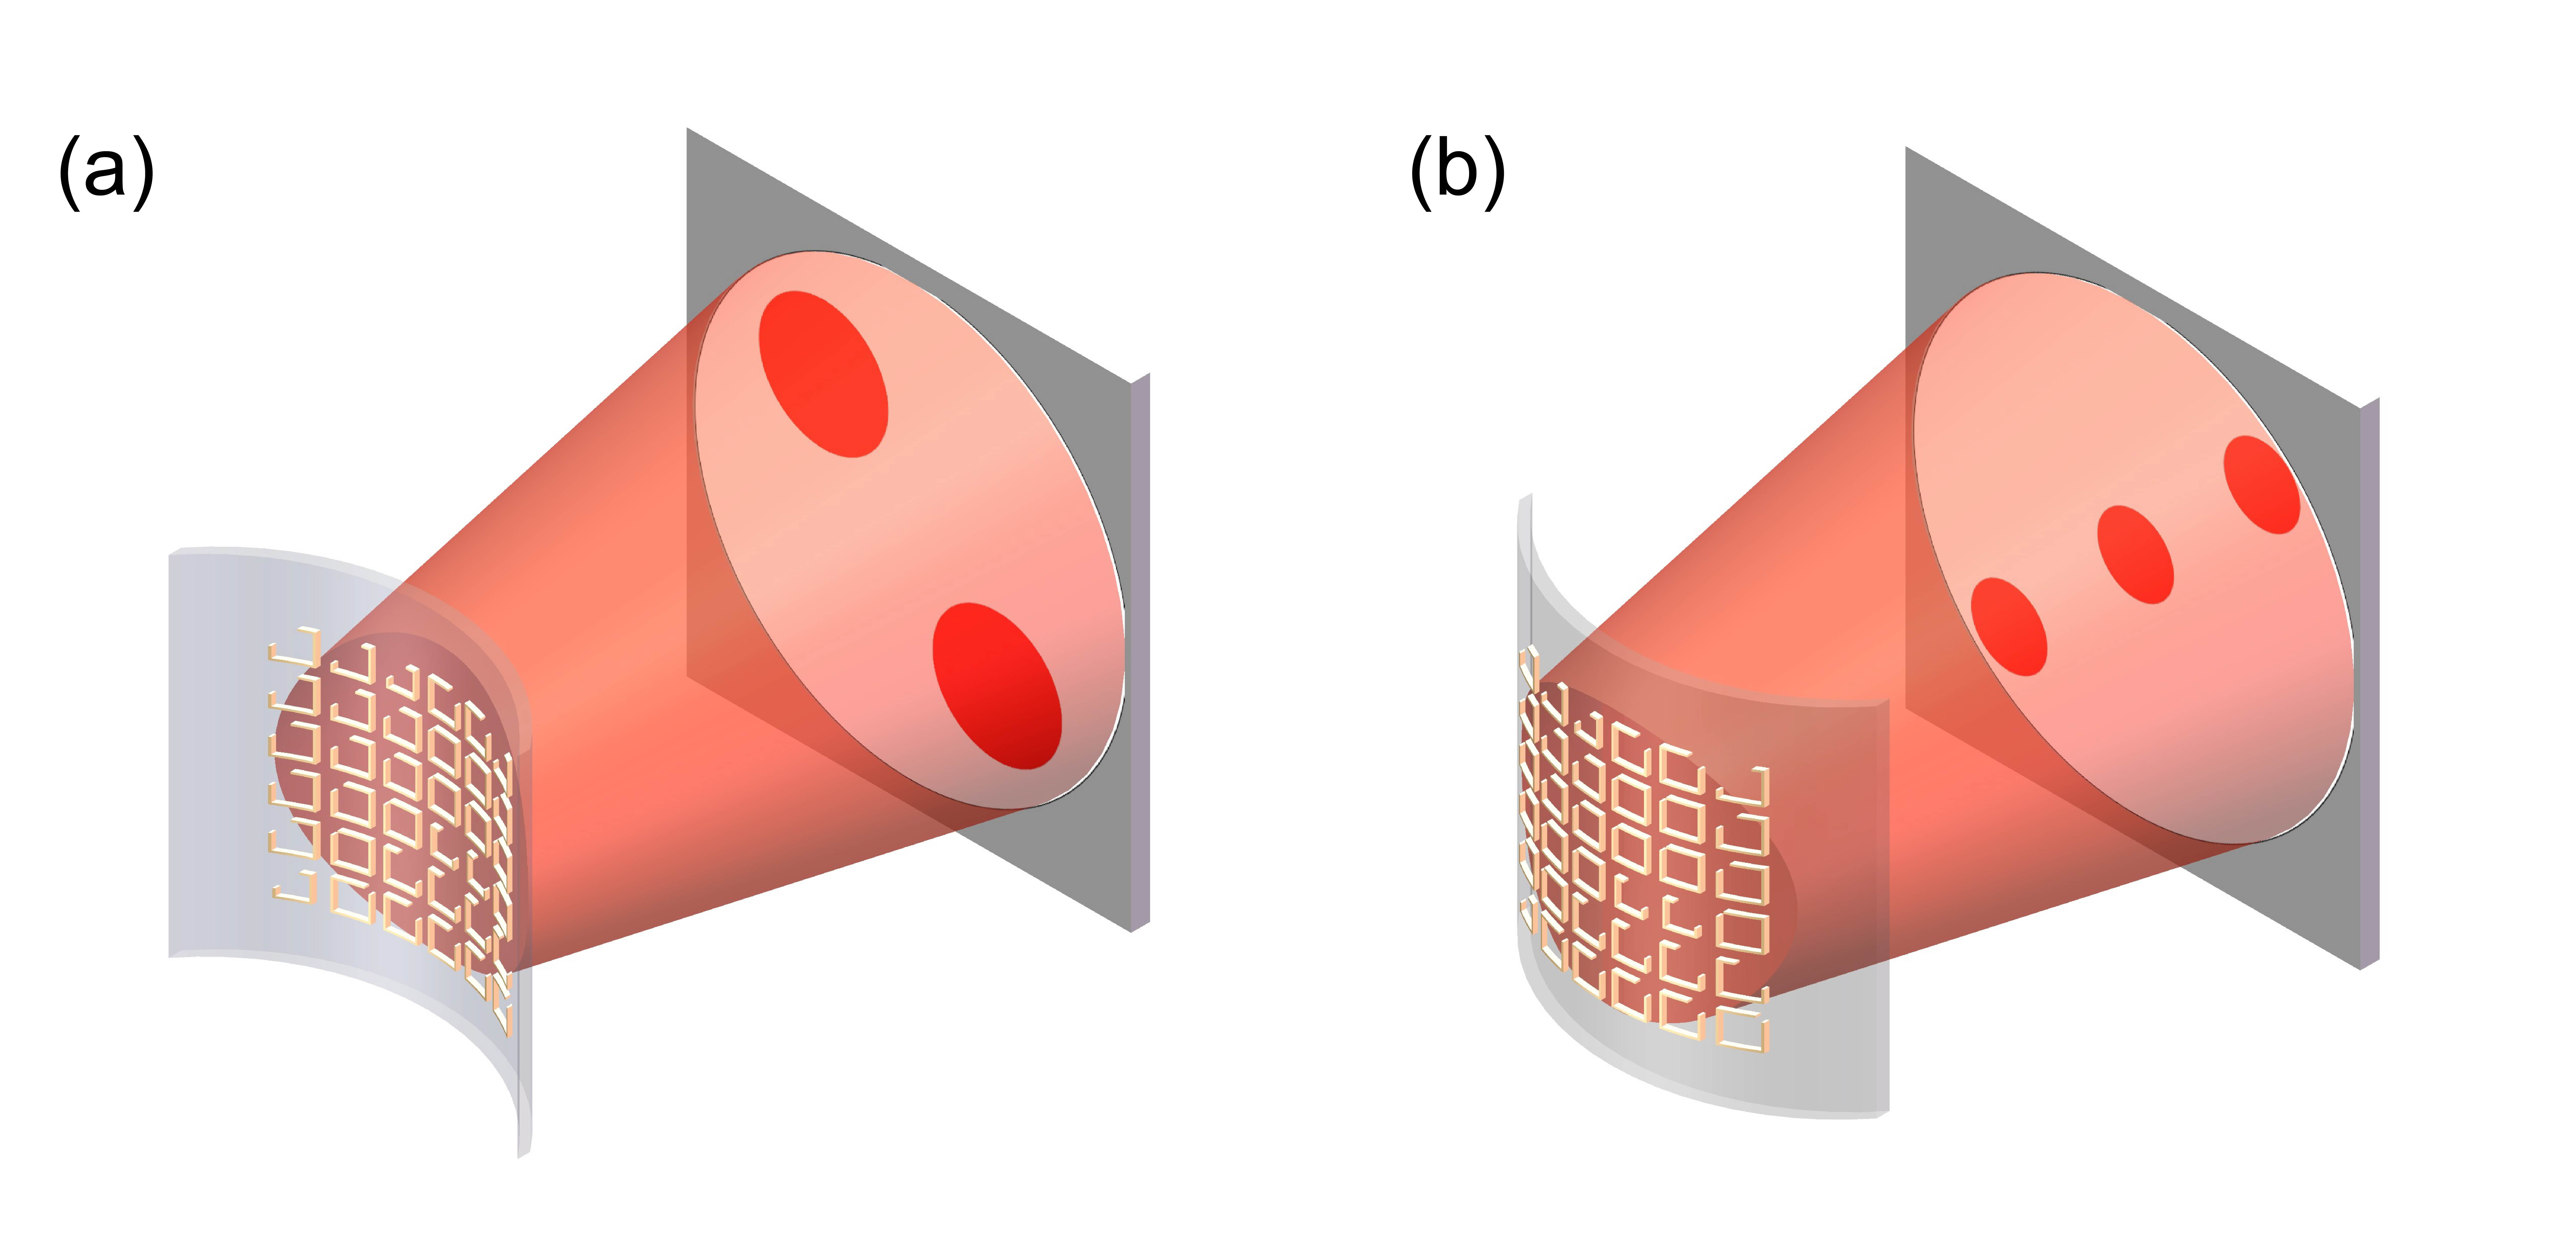 Schematic showing a single holographic metasurface in two configurations. In one panel the metasurface is in a convex shape and displays an image consisting of two focal spots (in the top left and bottom right hand corners of the image plane). In the second panel the metasurface is in a concave shae and display an image consisting of three focal spots, along the diagonal going from the bottom left to the top right corner of the image plane.